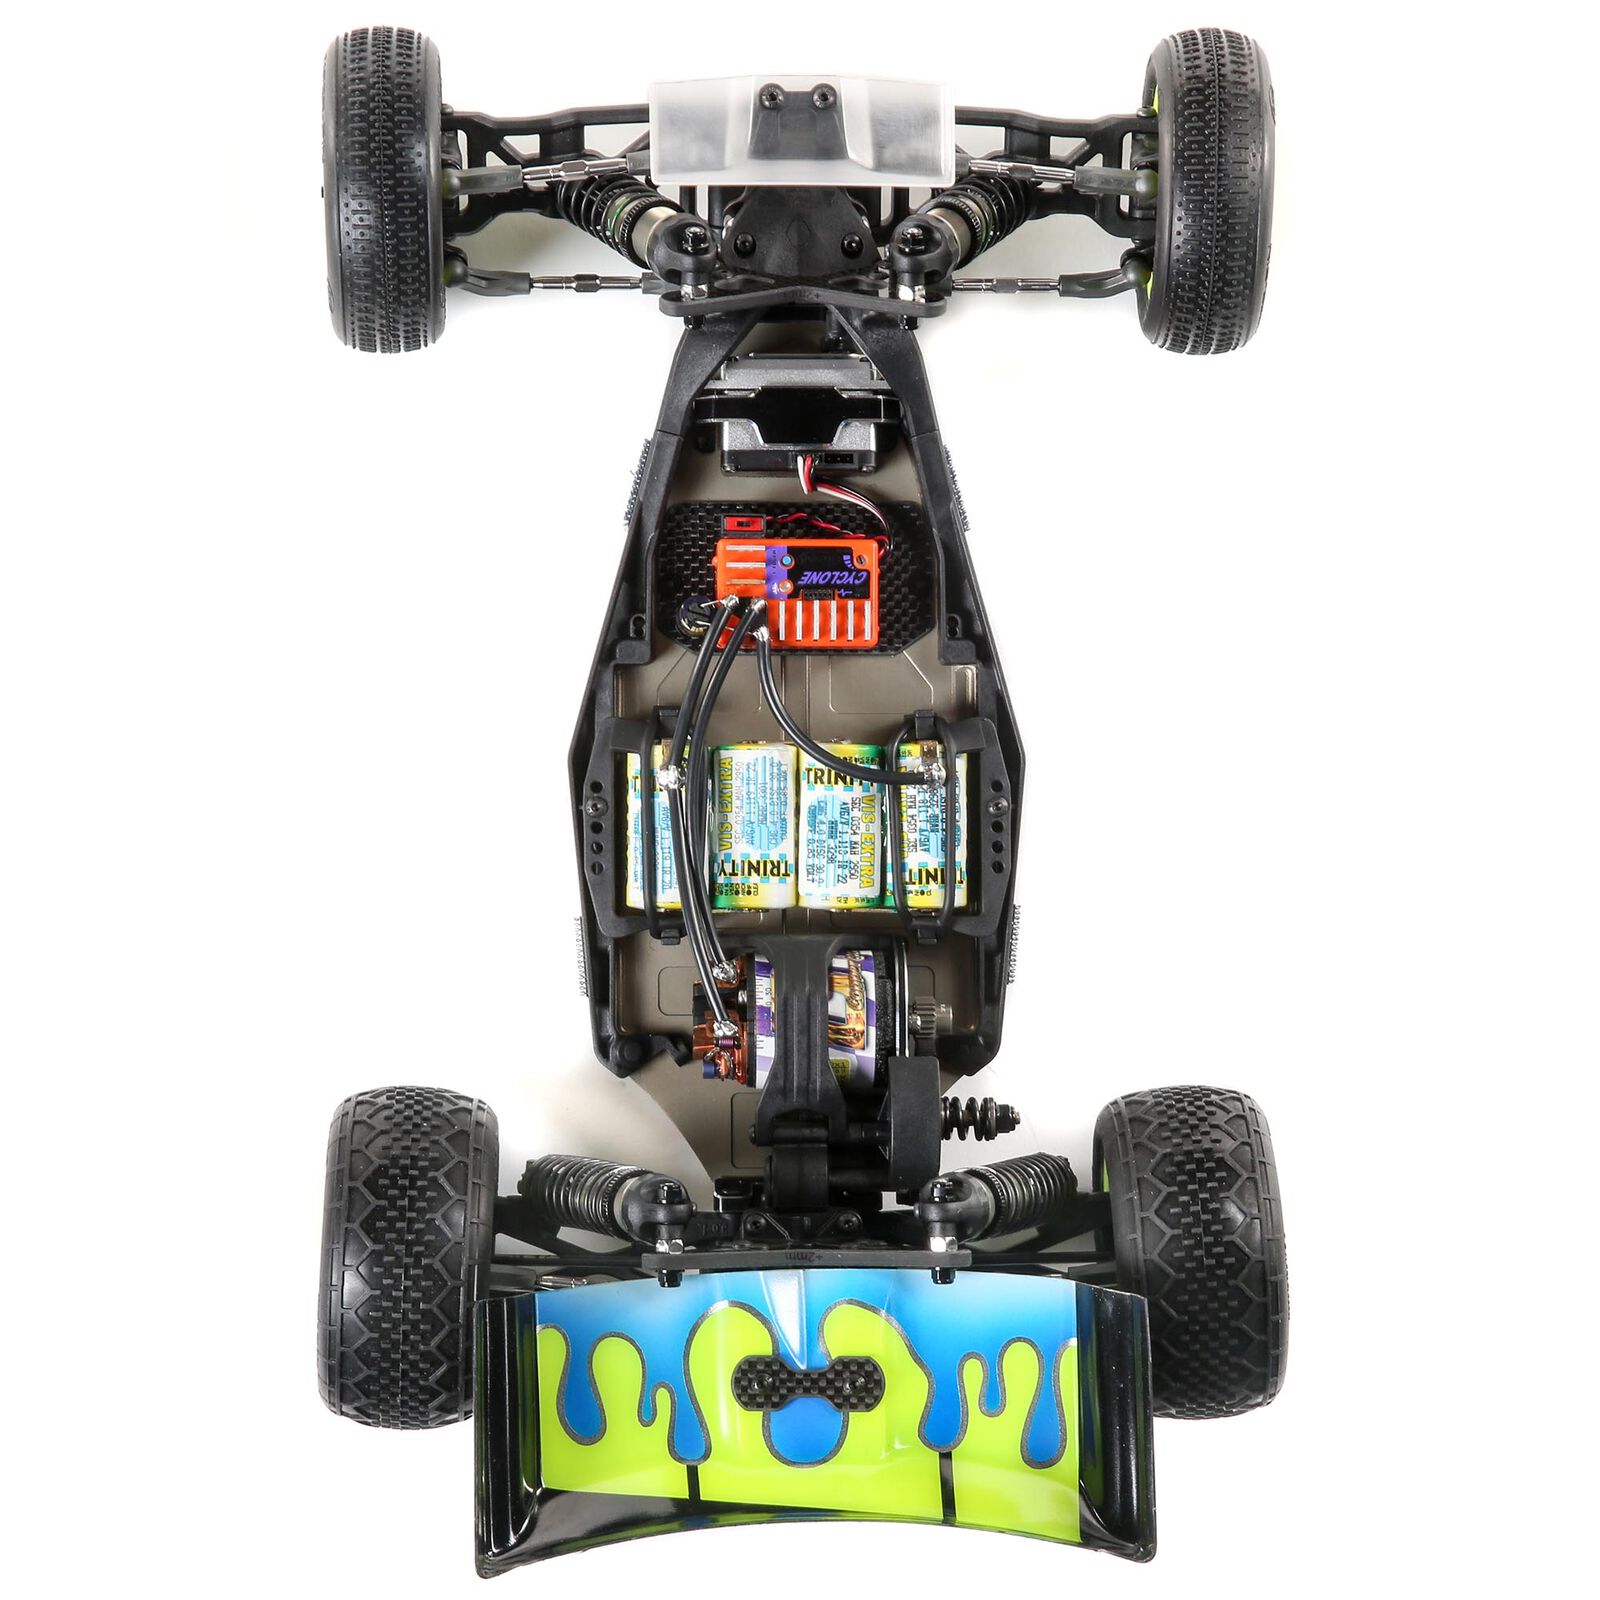 22 5.0 Team Losi Racing 230012 light weight Body /& Wing Clear